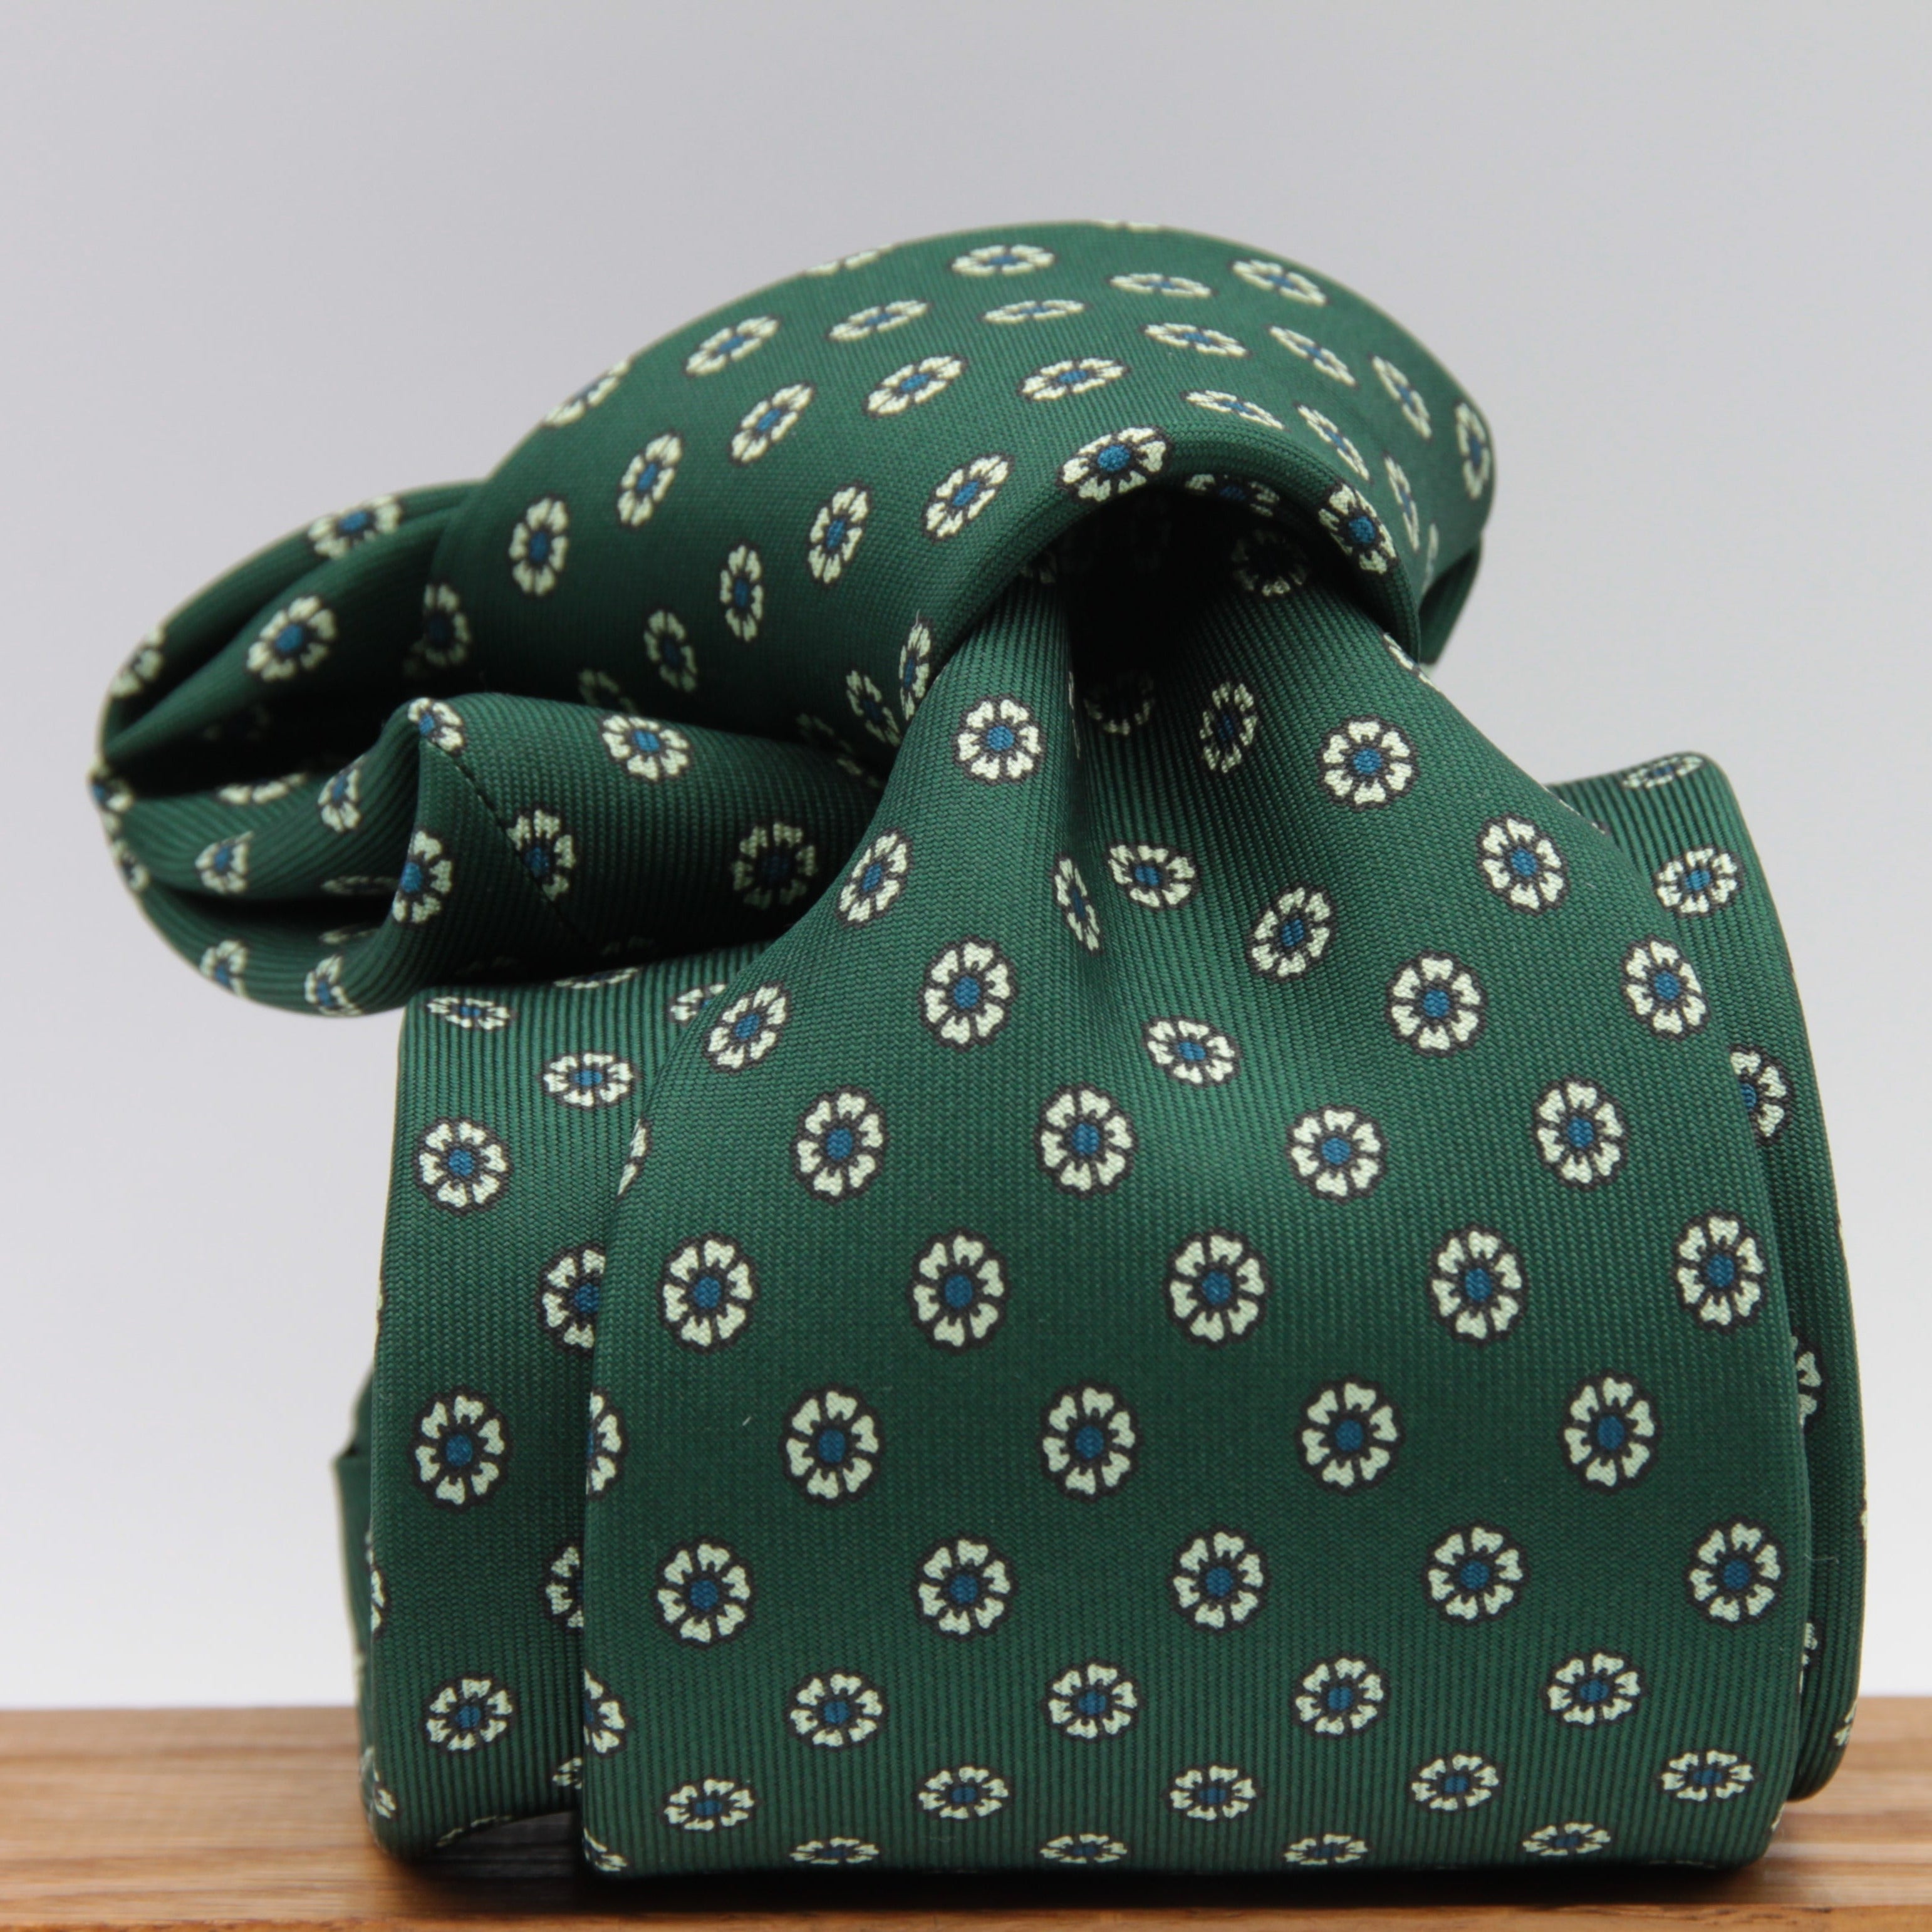 Drake's for Cruciani & Bella 36 oz Self-Tipped 100% Printed Silk Green, White and Blue Motif Tie Handmade in London. England 9 cm x 150 cm #3851